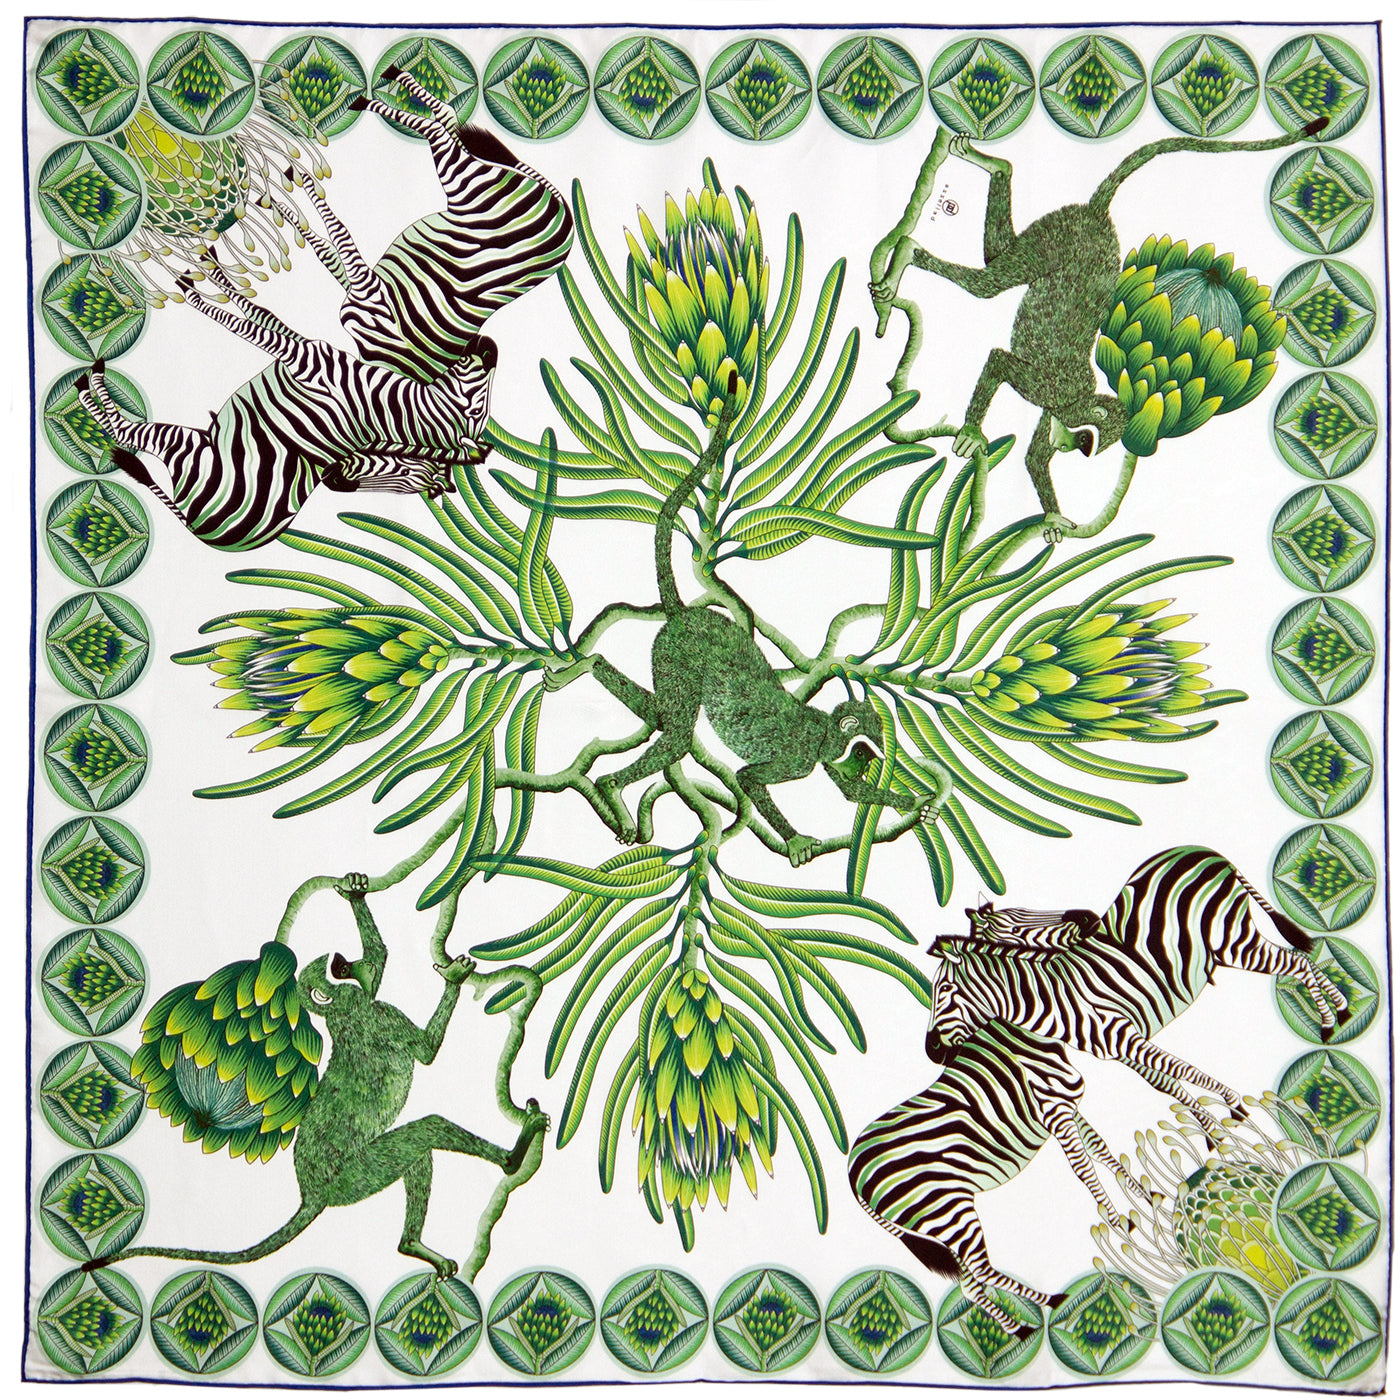 Blue and green silk scarf with Zebras Monkies and Protea flowers